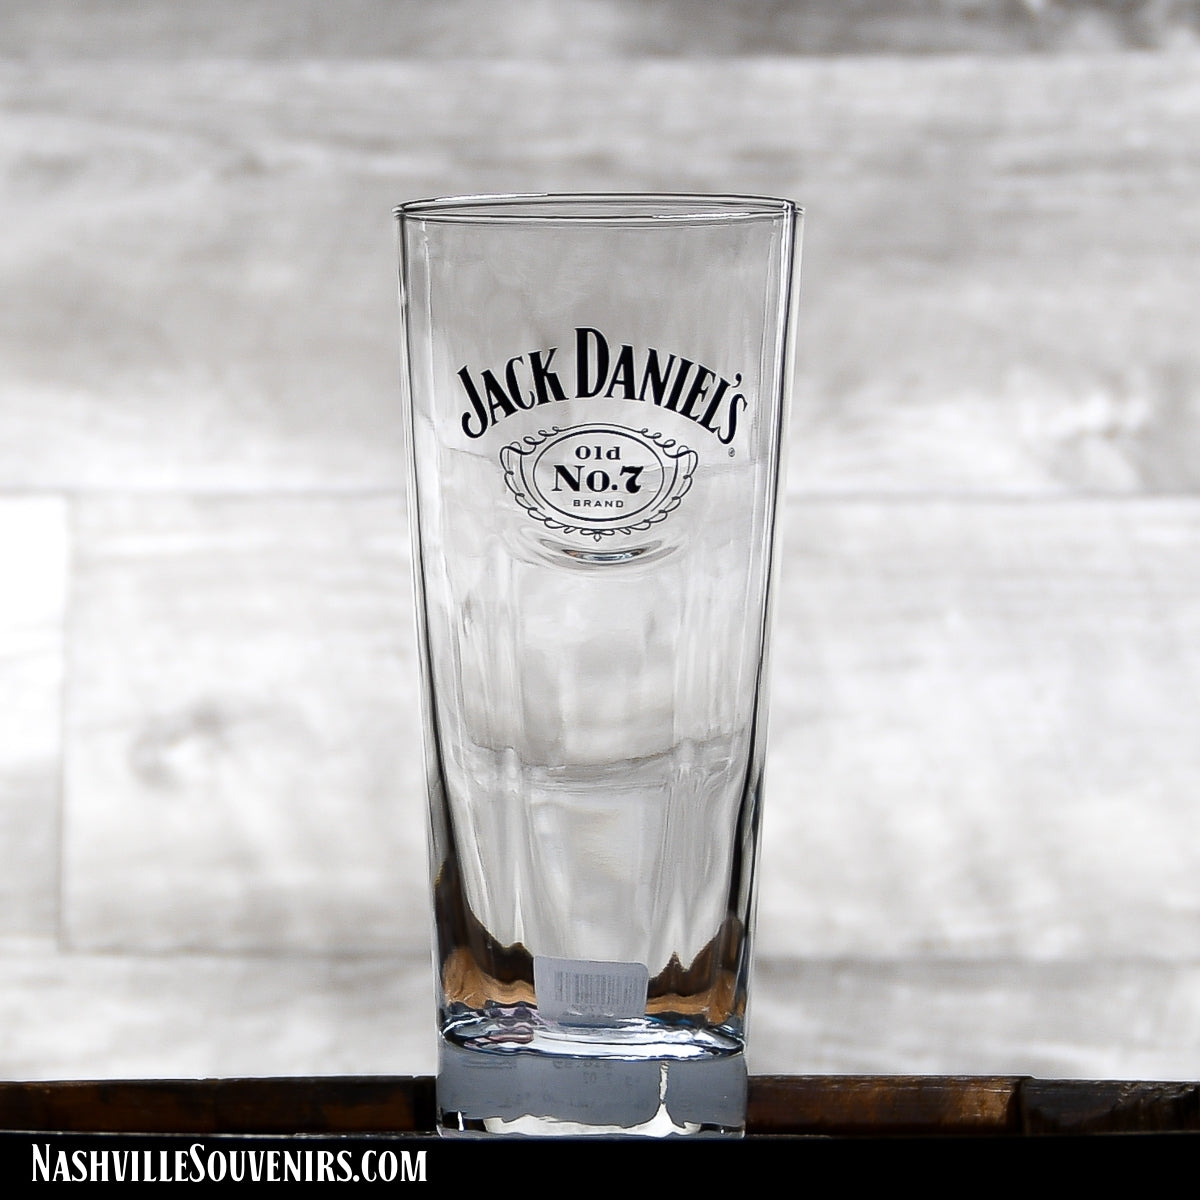 Officially licensed Jack Daniels Event Tall Rocks Glass with Swing Logo. FREE SHIPPING on all US orders over $75!